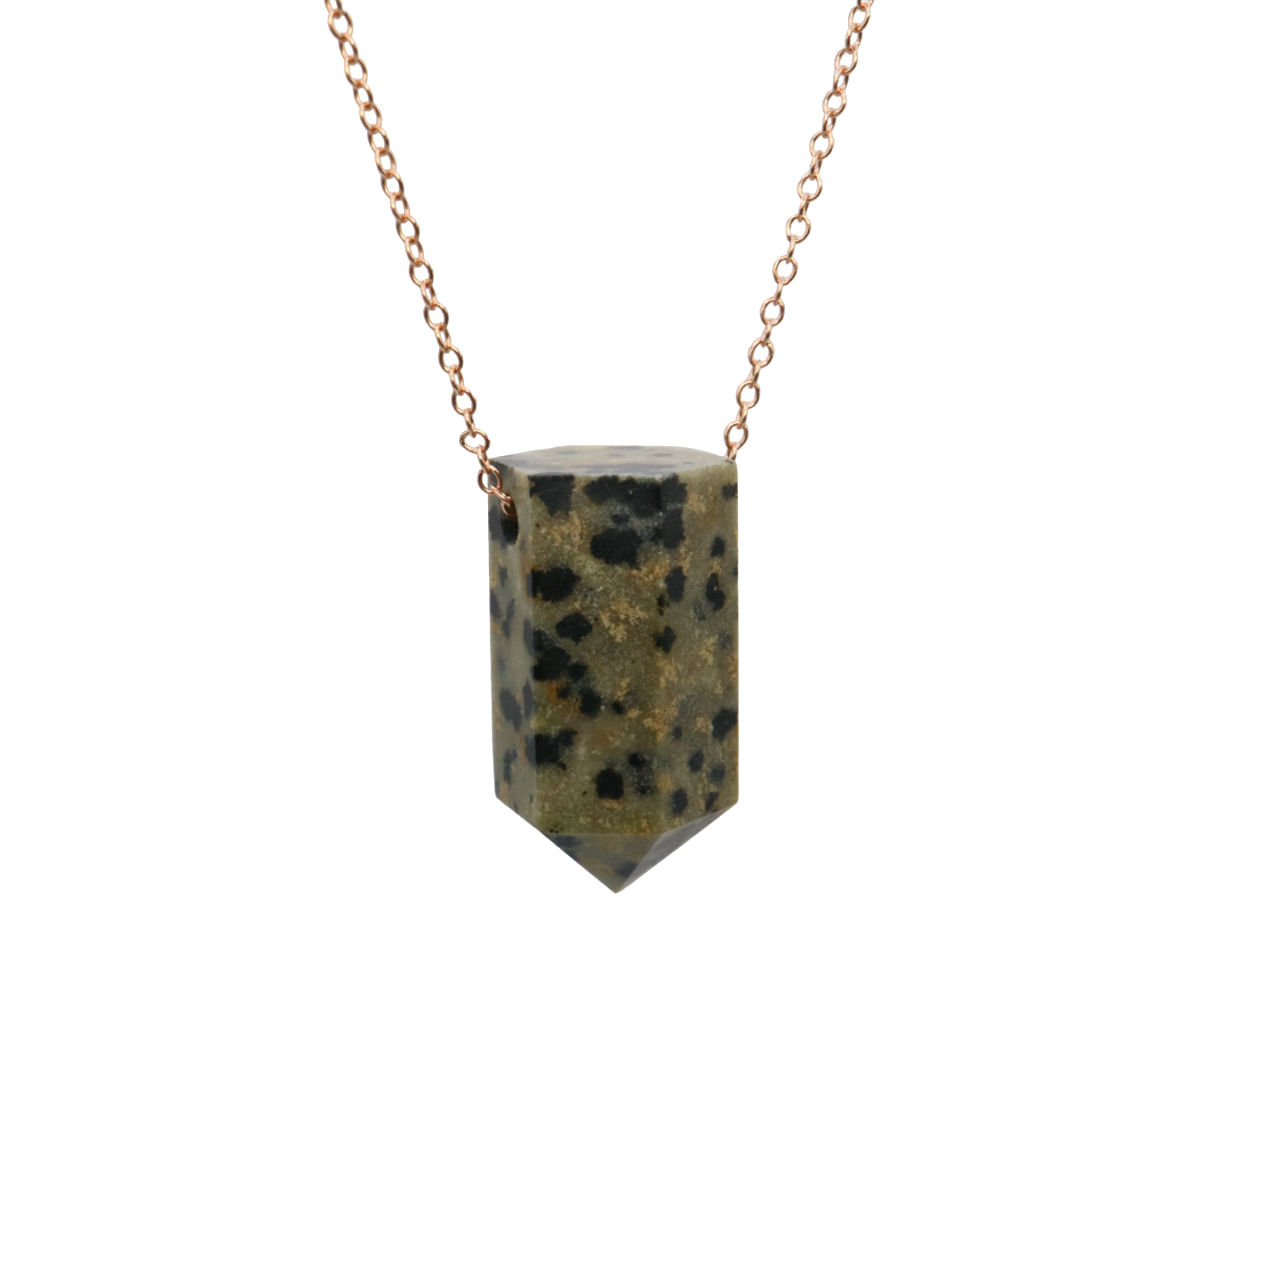 Dalmation Jasper Crystal on a fine Rose Gold plated 925 Sterling Silver chain